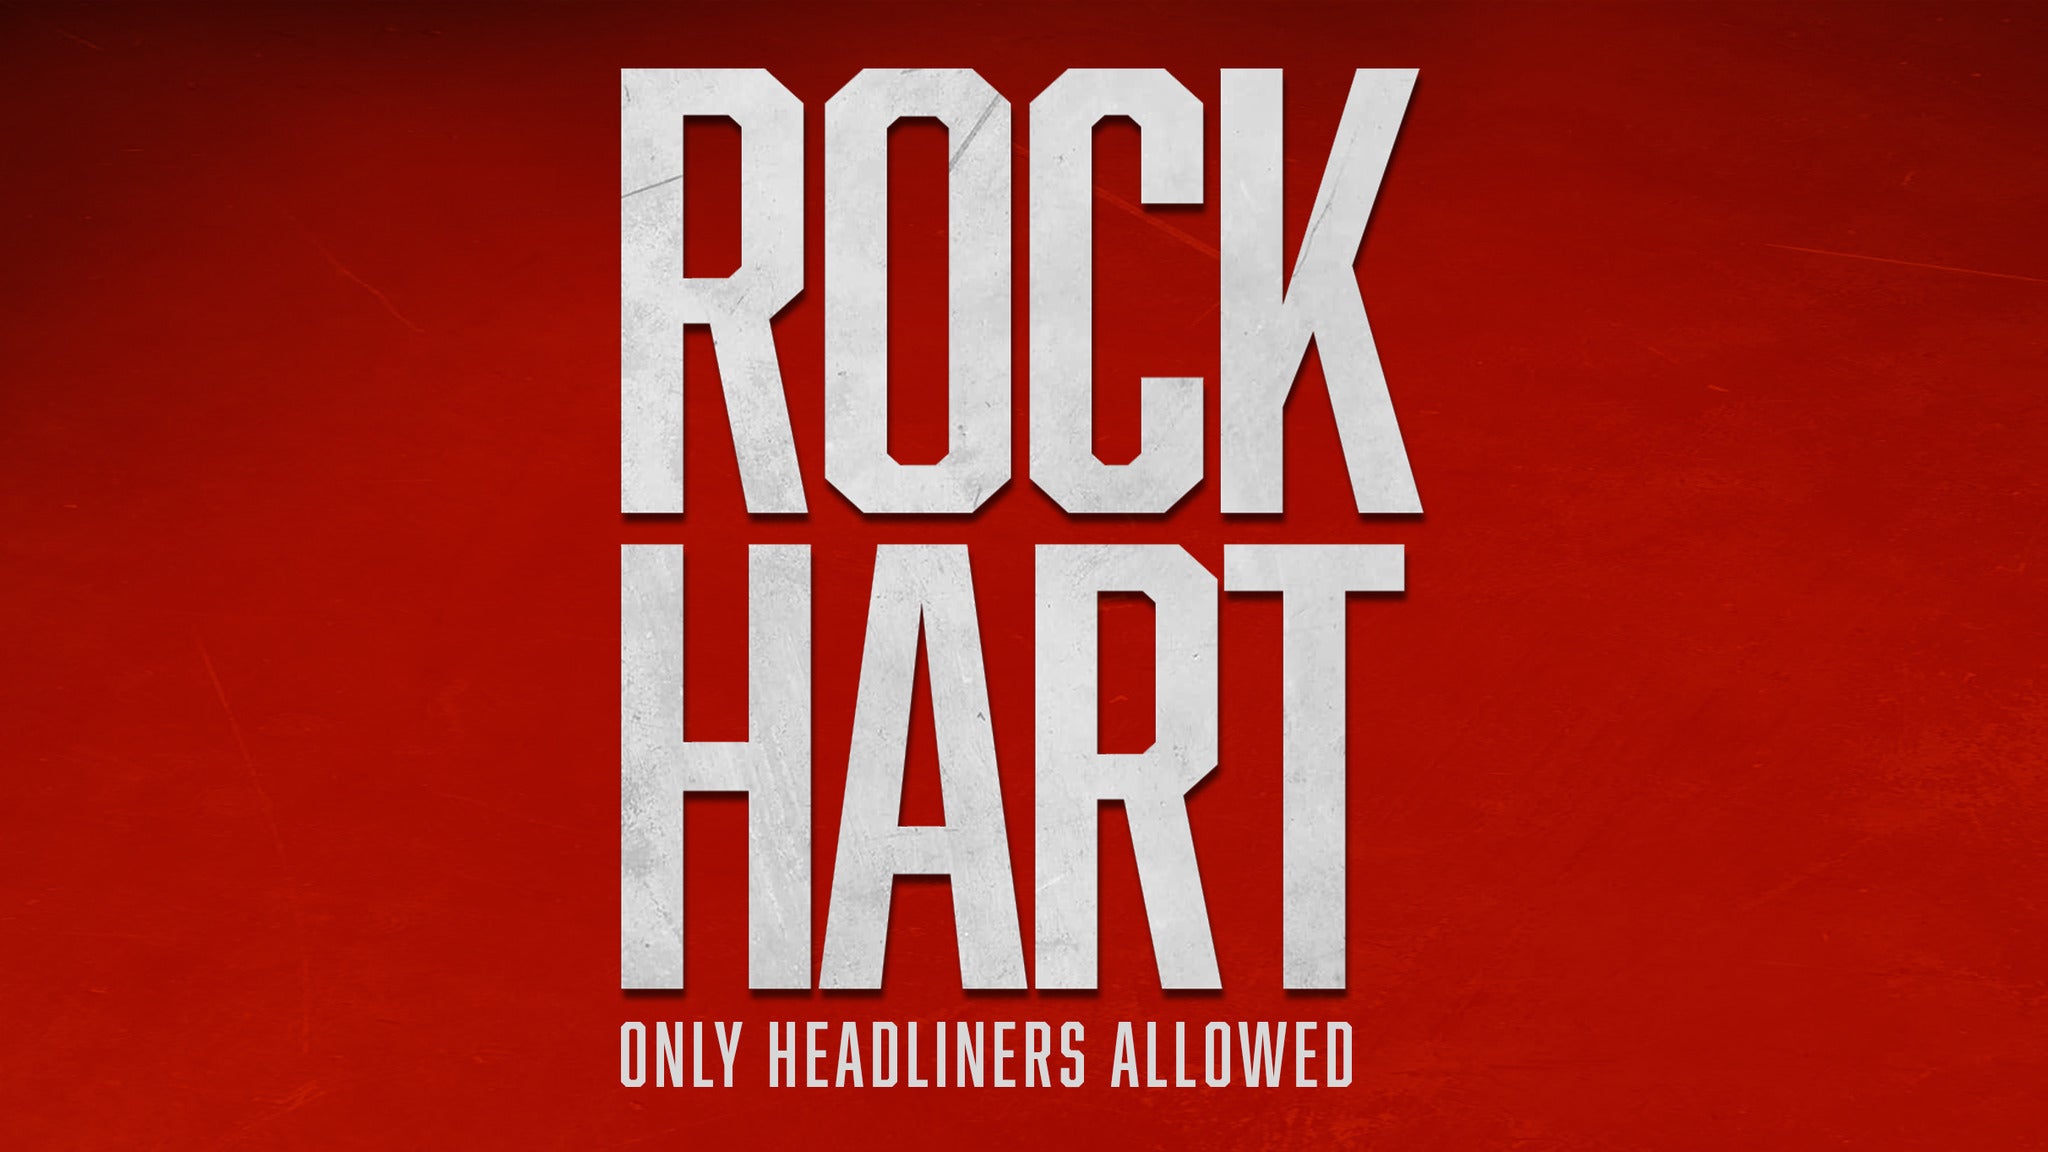 Rock Hart: Only Headliners Allowed pre-sale password for early tickets in Brooklyn